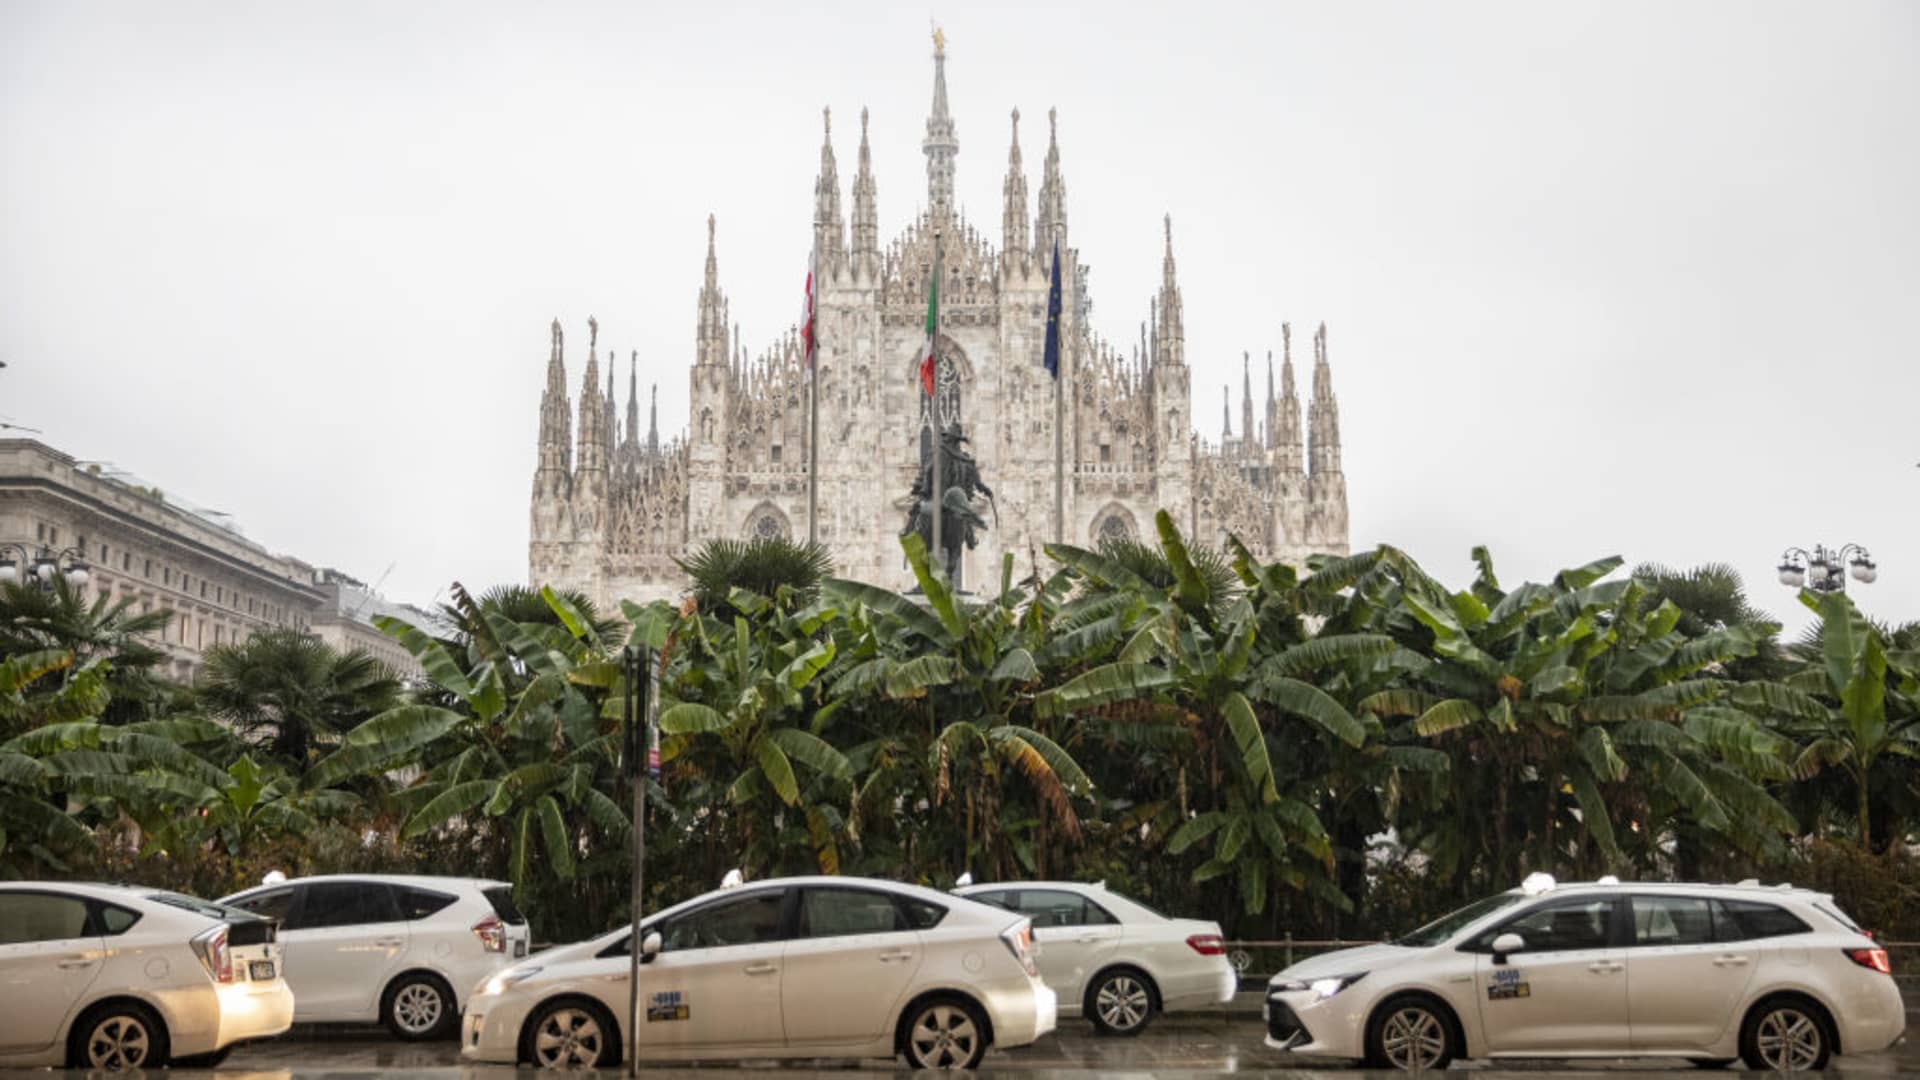 Taxis parked in front of the Duomo Cathedral in Milan, Italy.